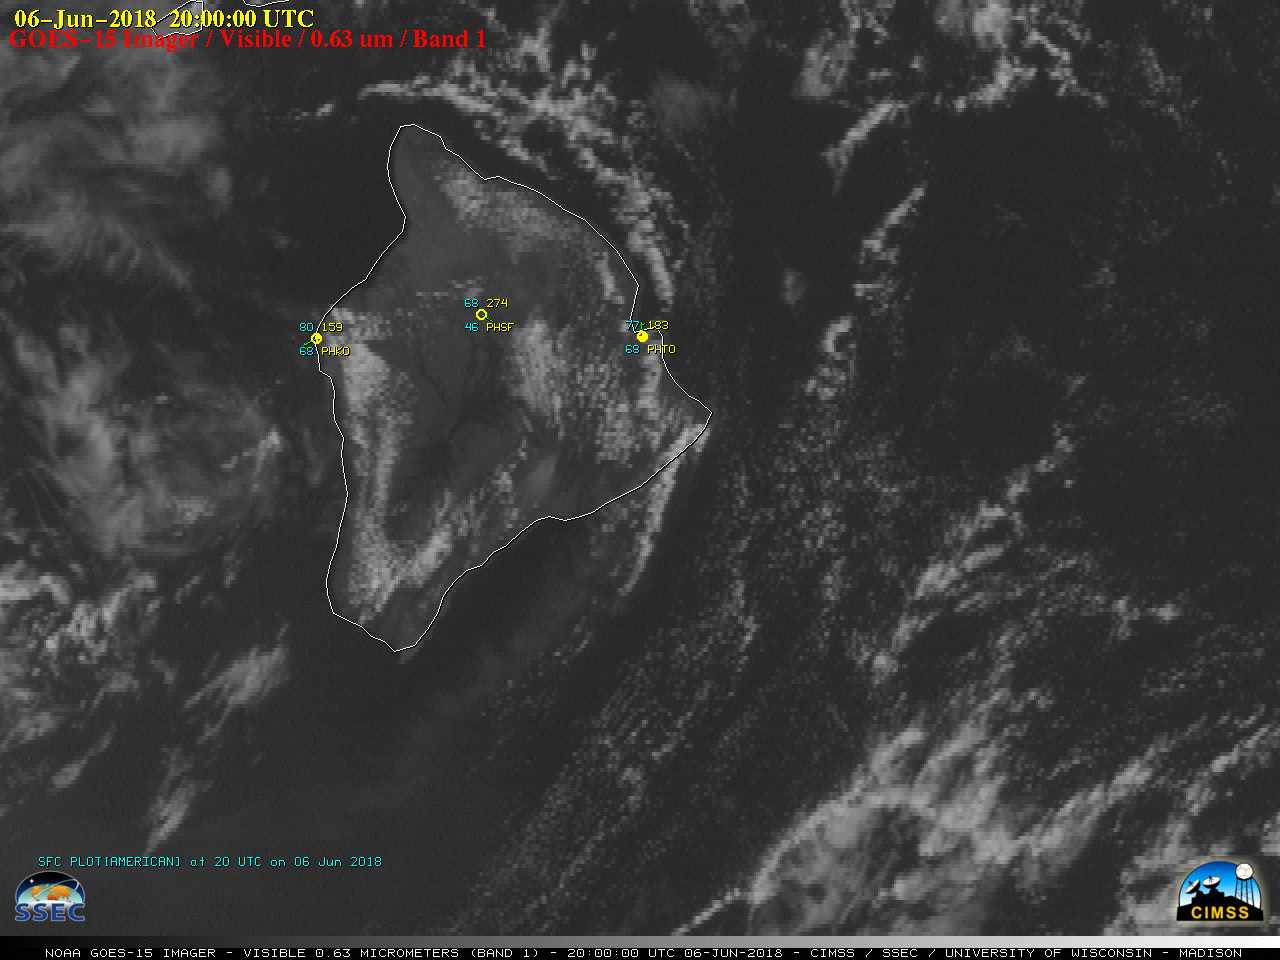 GOES-15 Visible (0.63 µm) images, with hourly plots of surface reports [click to play MP4 animation]